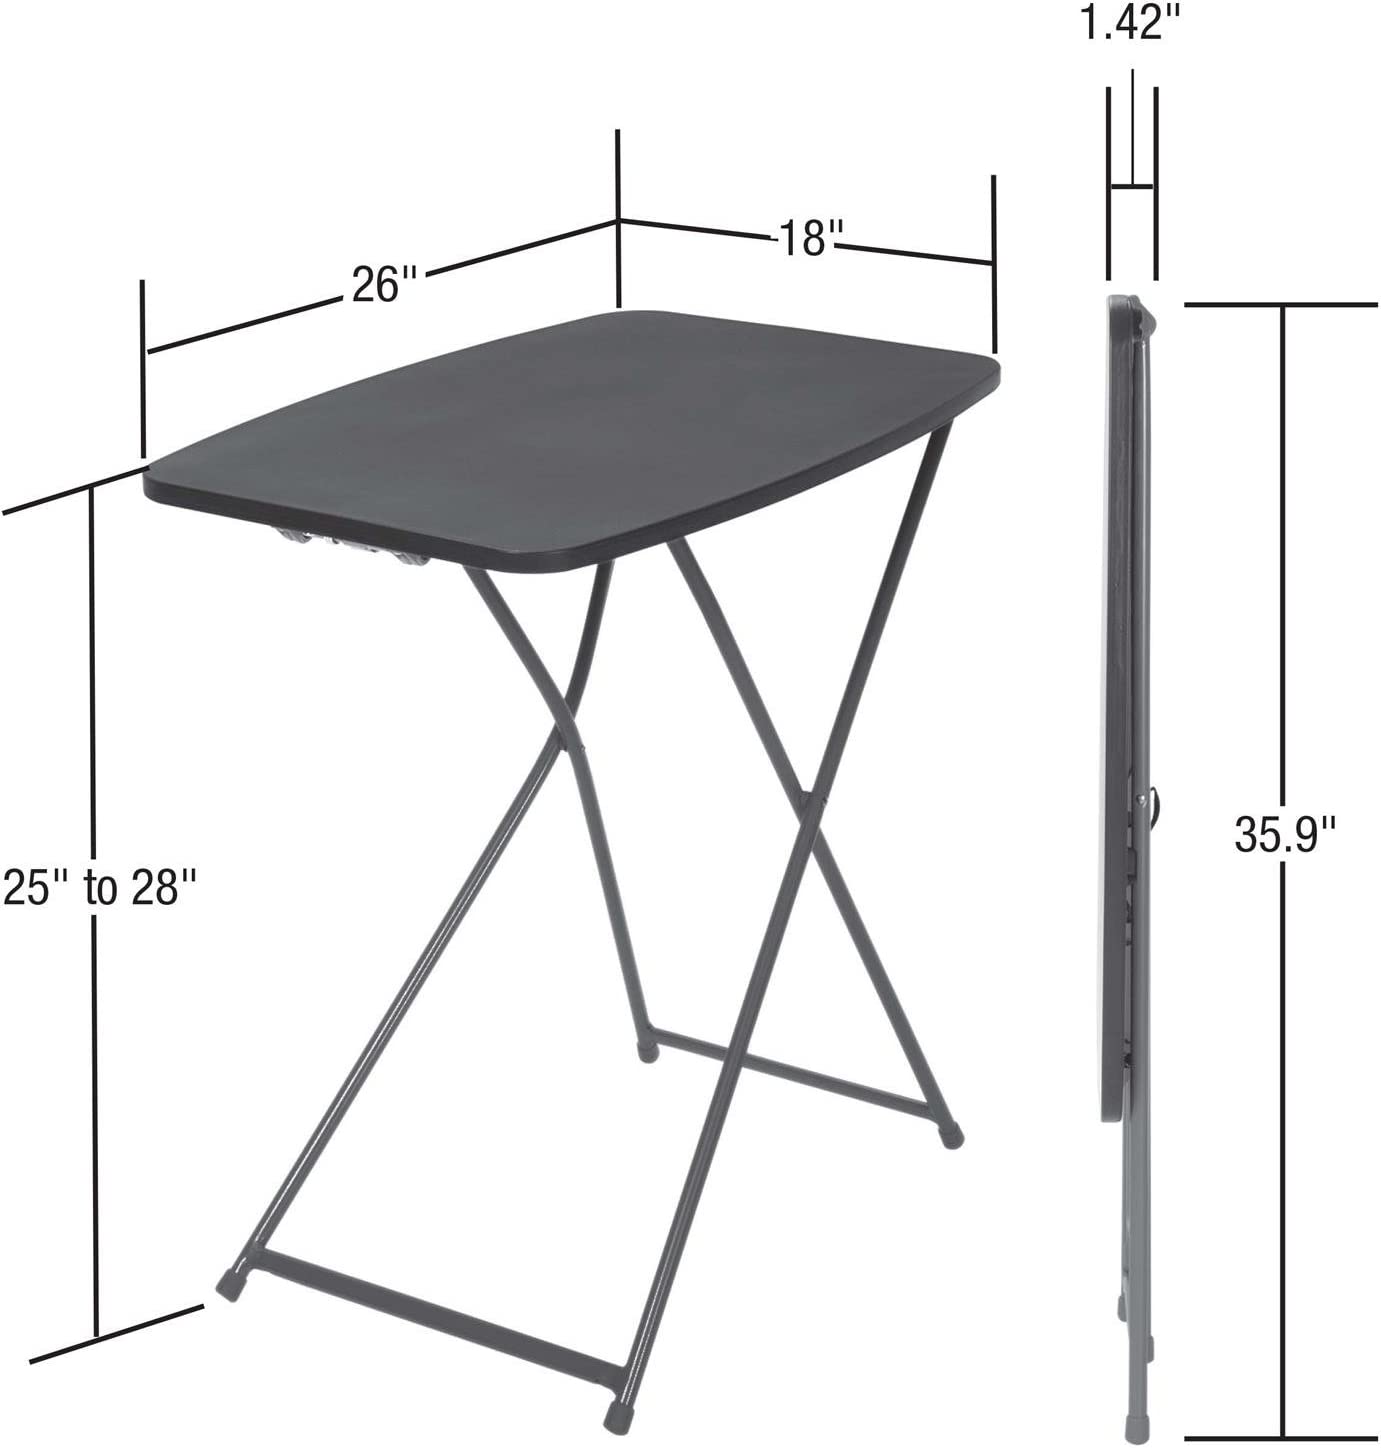 COSCO Multi-Purpose, Adjustable Height Personal Folding Activity Table, 2 Pack, Black